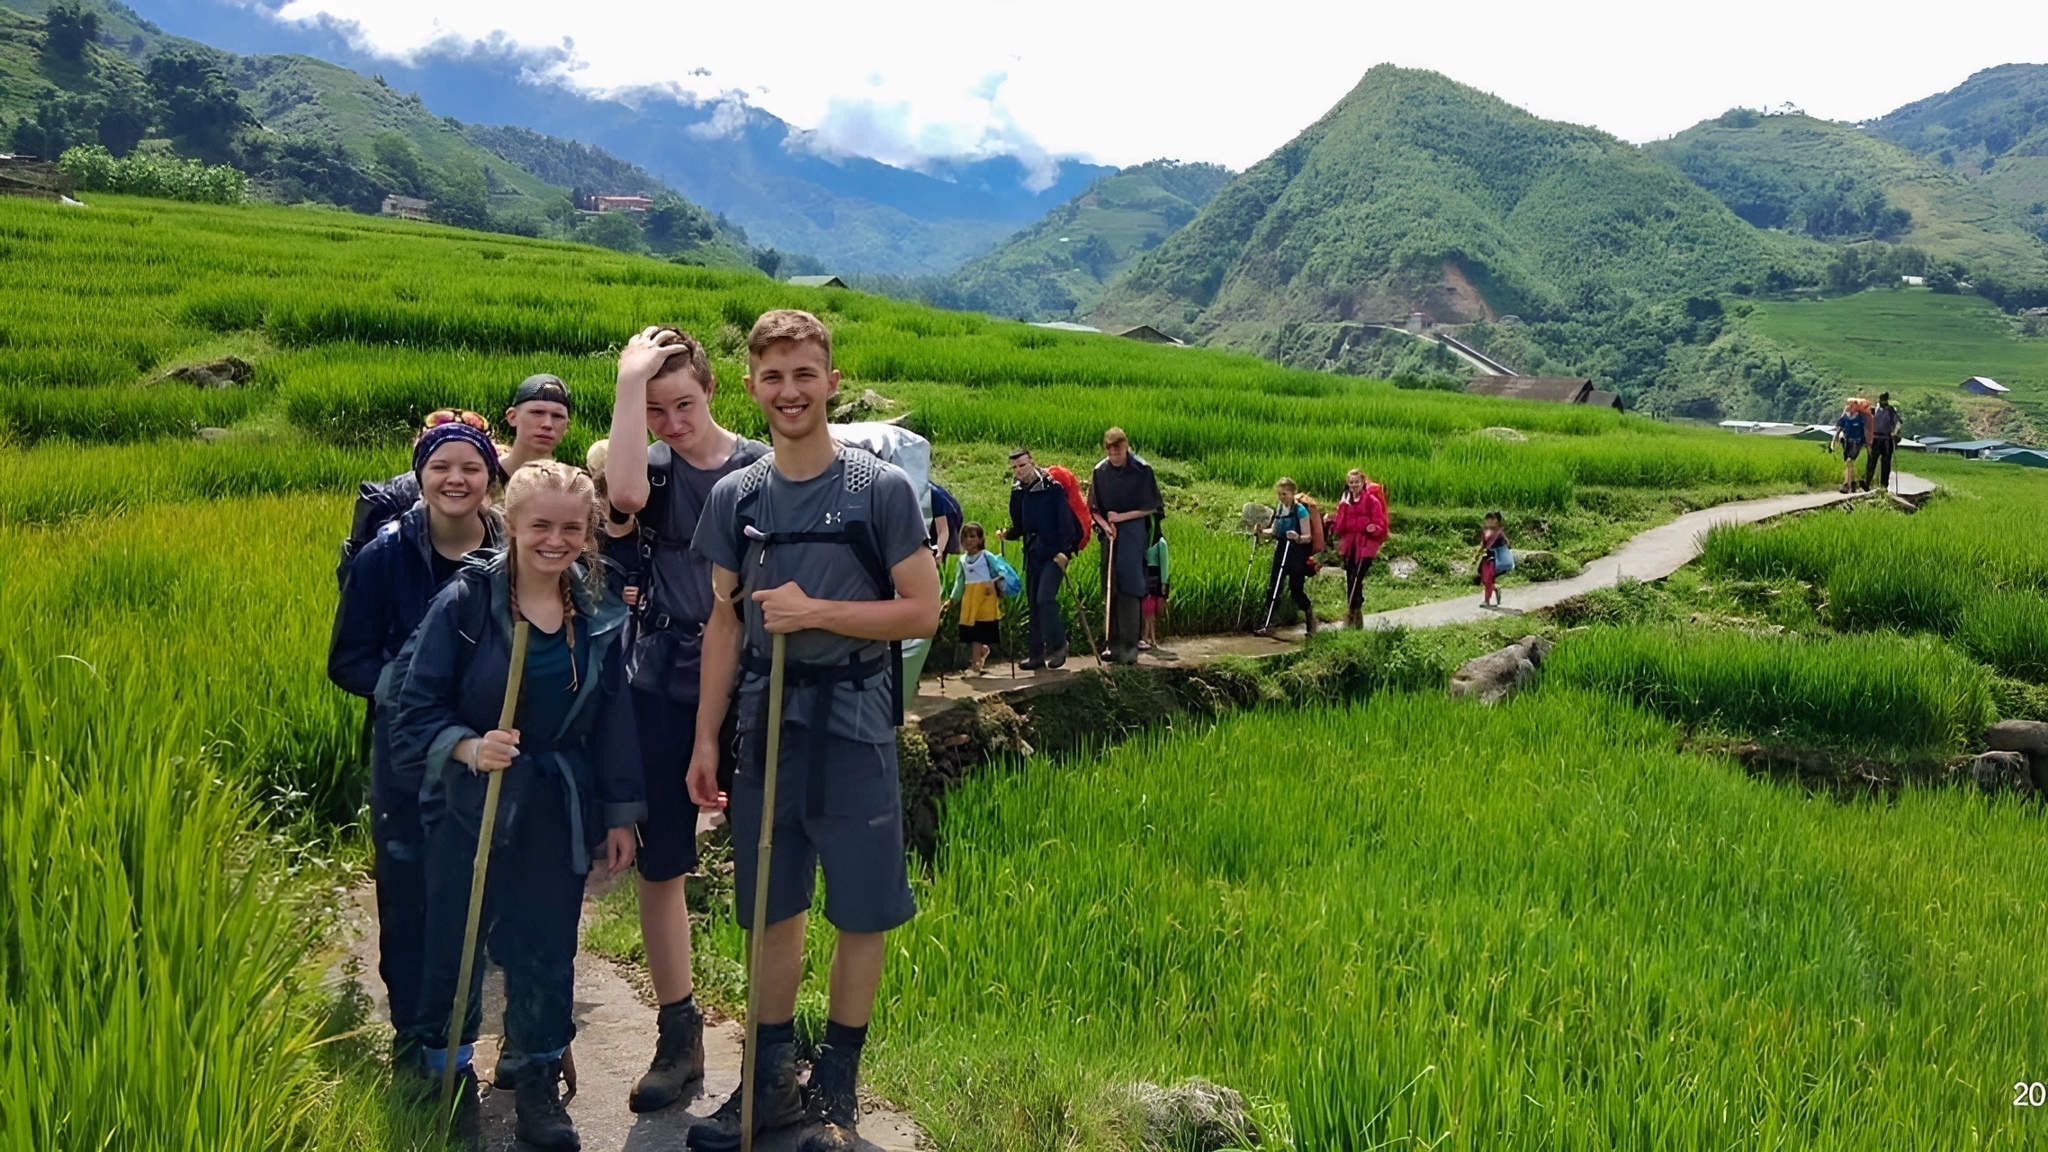 Sapa trekking tours are included in Vietnam and Cambodia 2-week itineraries